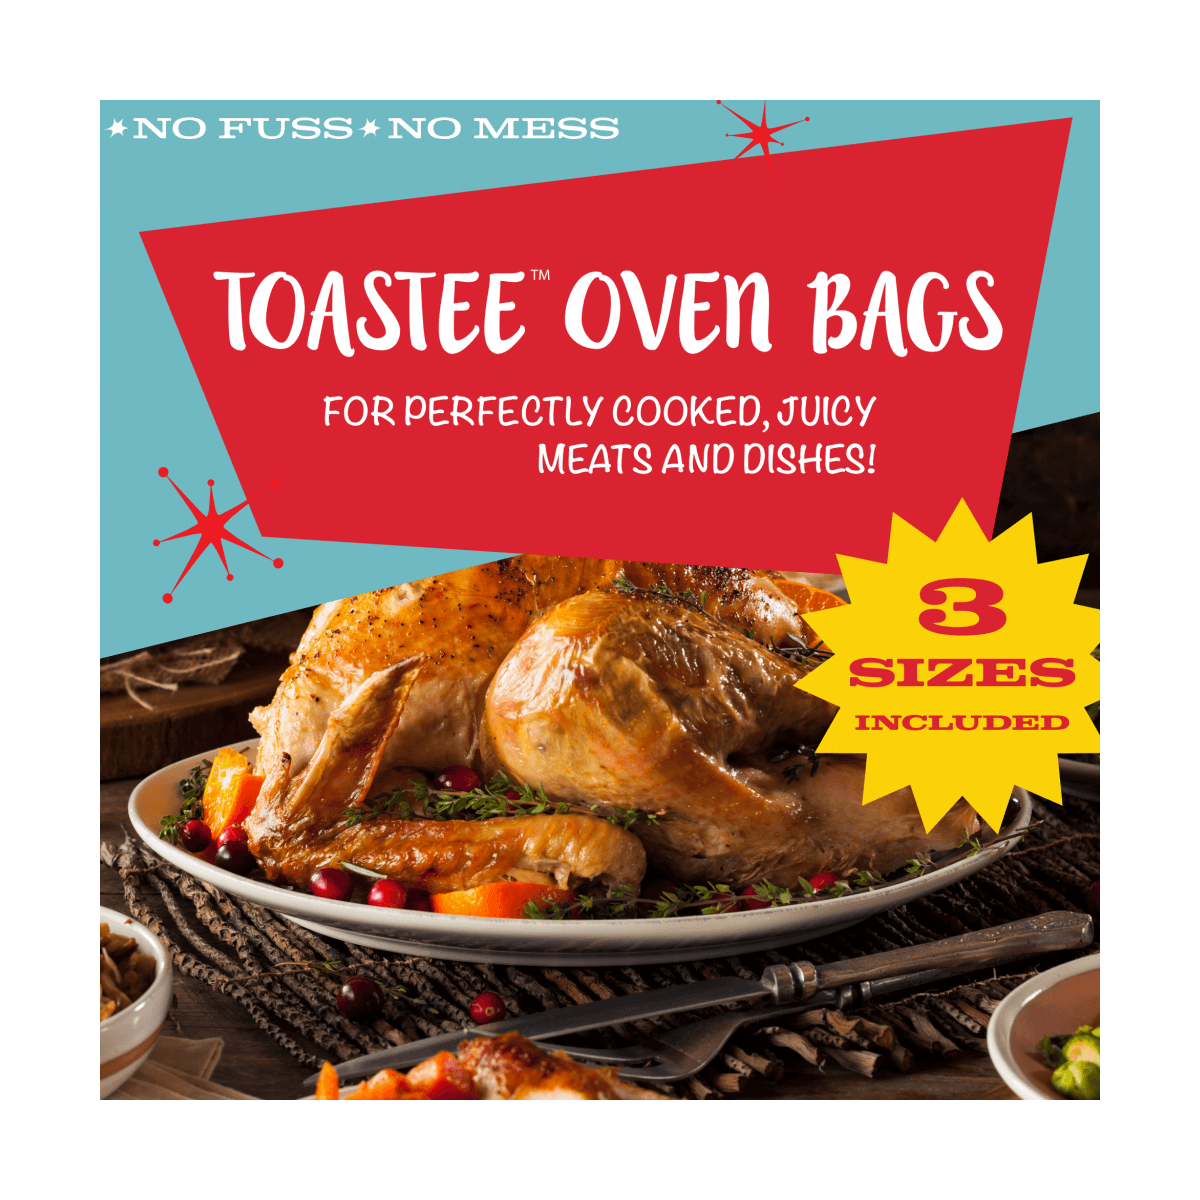 TOASTEE Oven Roasting Bags for Chicken, Ham, Prime Rib, Poultry, Turkey, Ribs, Seafood, Vegetables, 3 Commercial Sizes